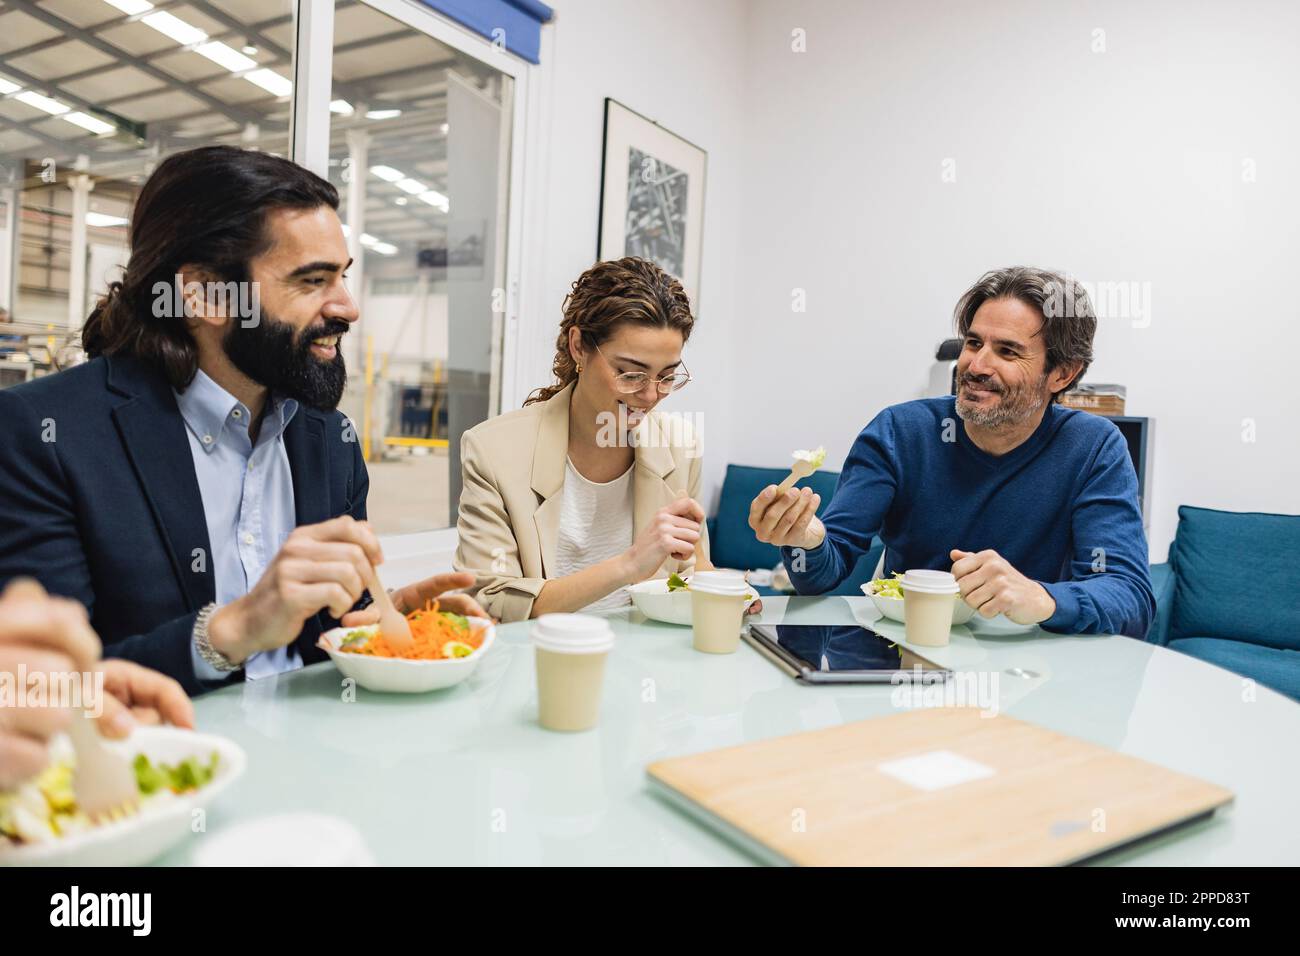 Happy colleagues having meal together in industry Stock Photo